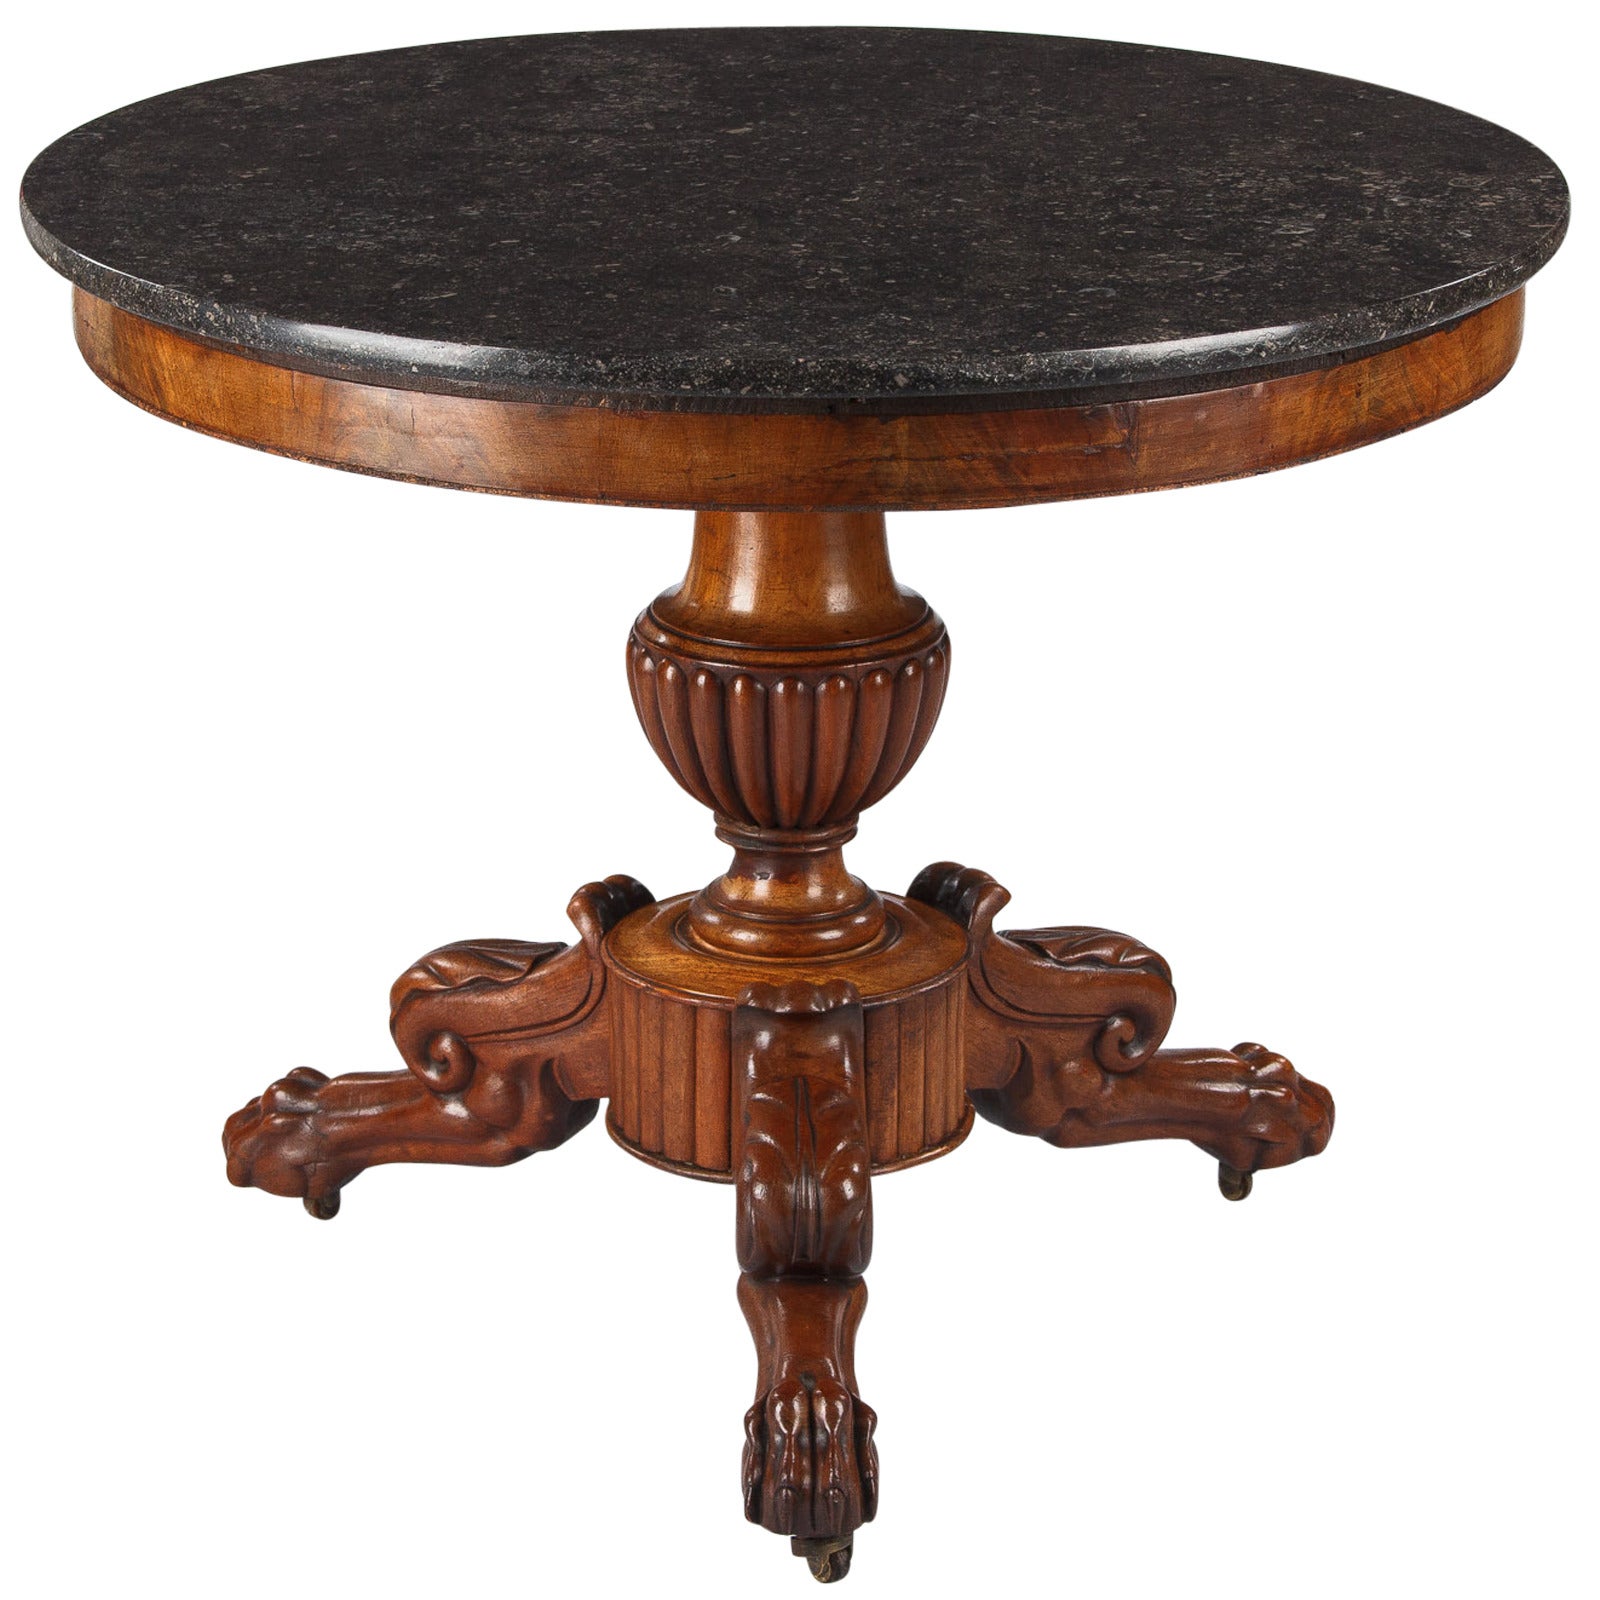 French Napoleon III Marble-Top Pedestal Table, 1870s